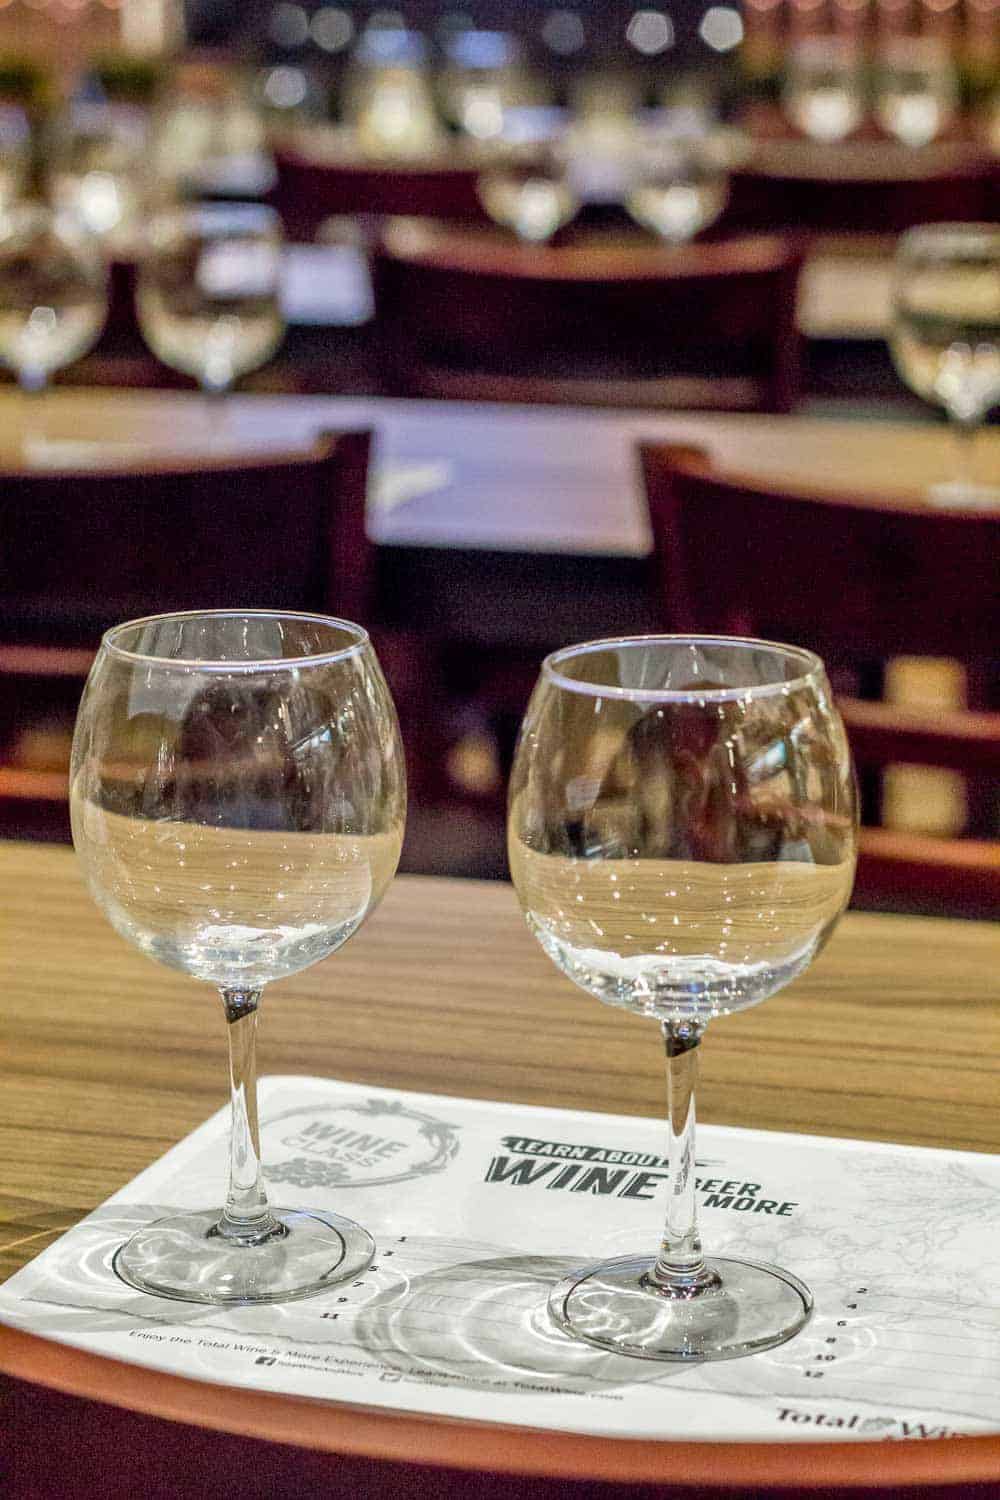 Learn all about wine at Total Wine & More's classroom tastings.